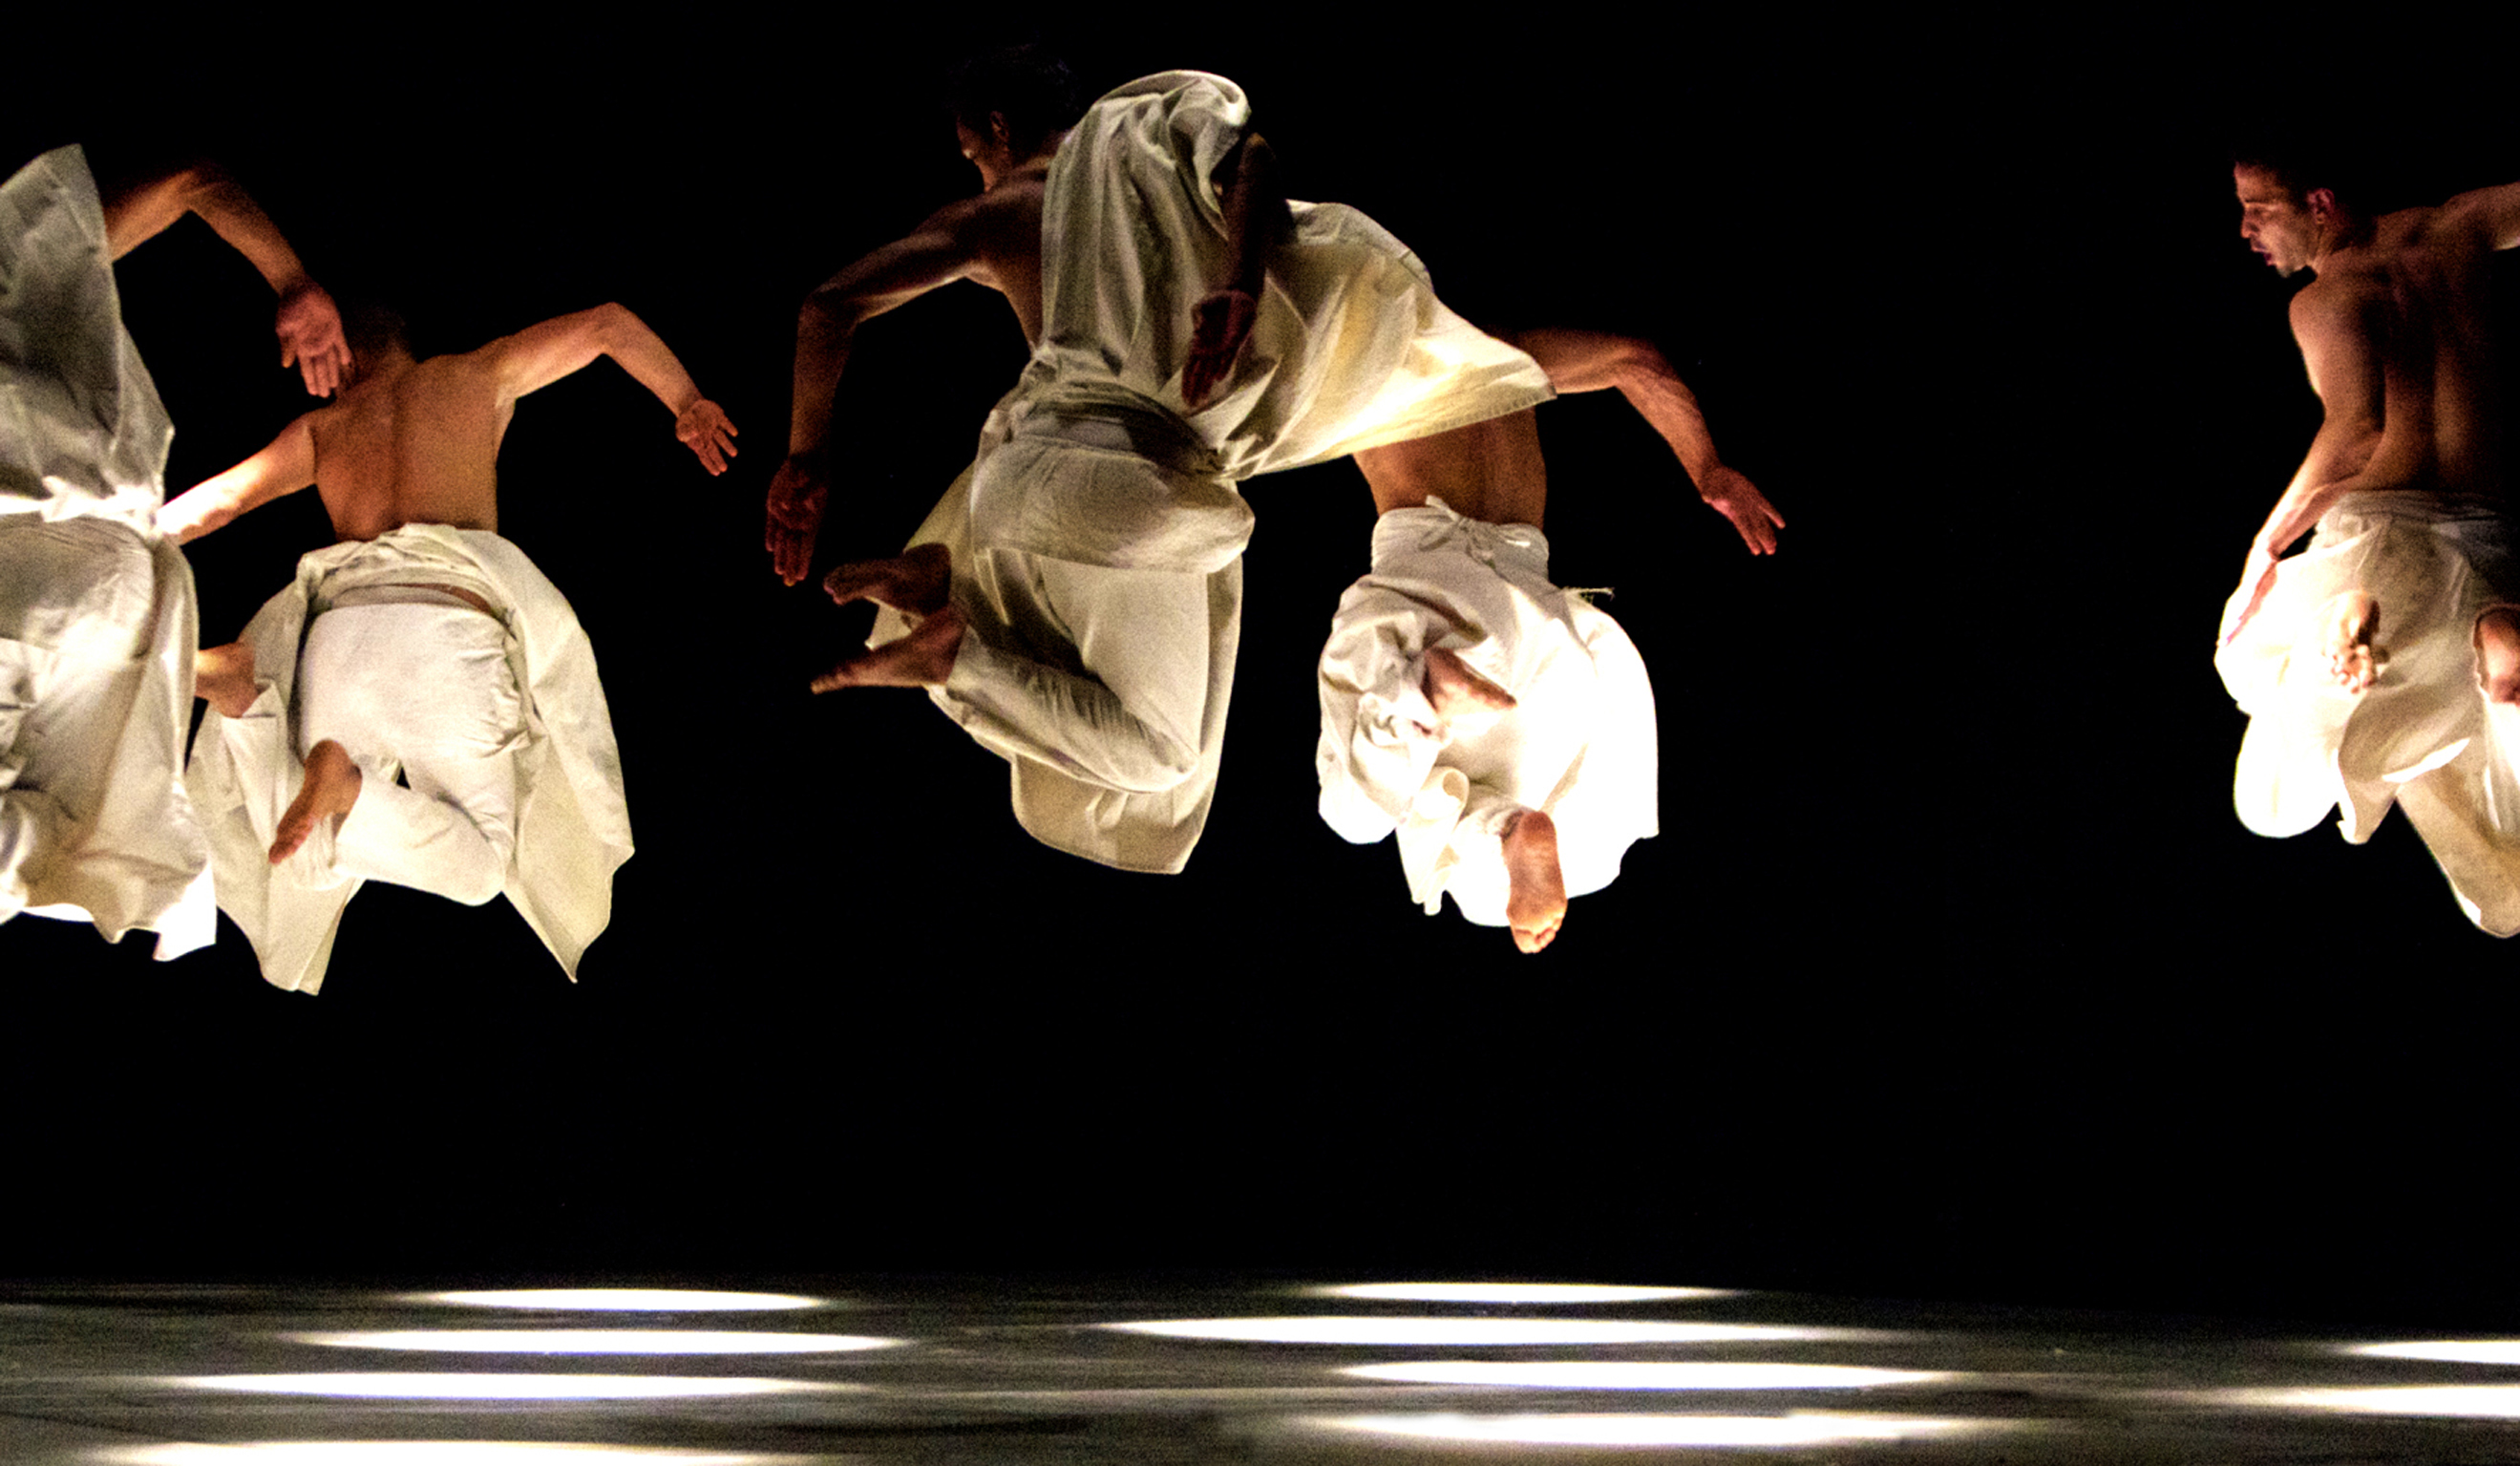 Herve Koub dance troupe leaping on stage